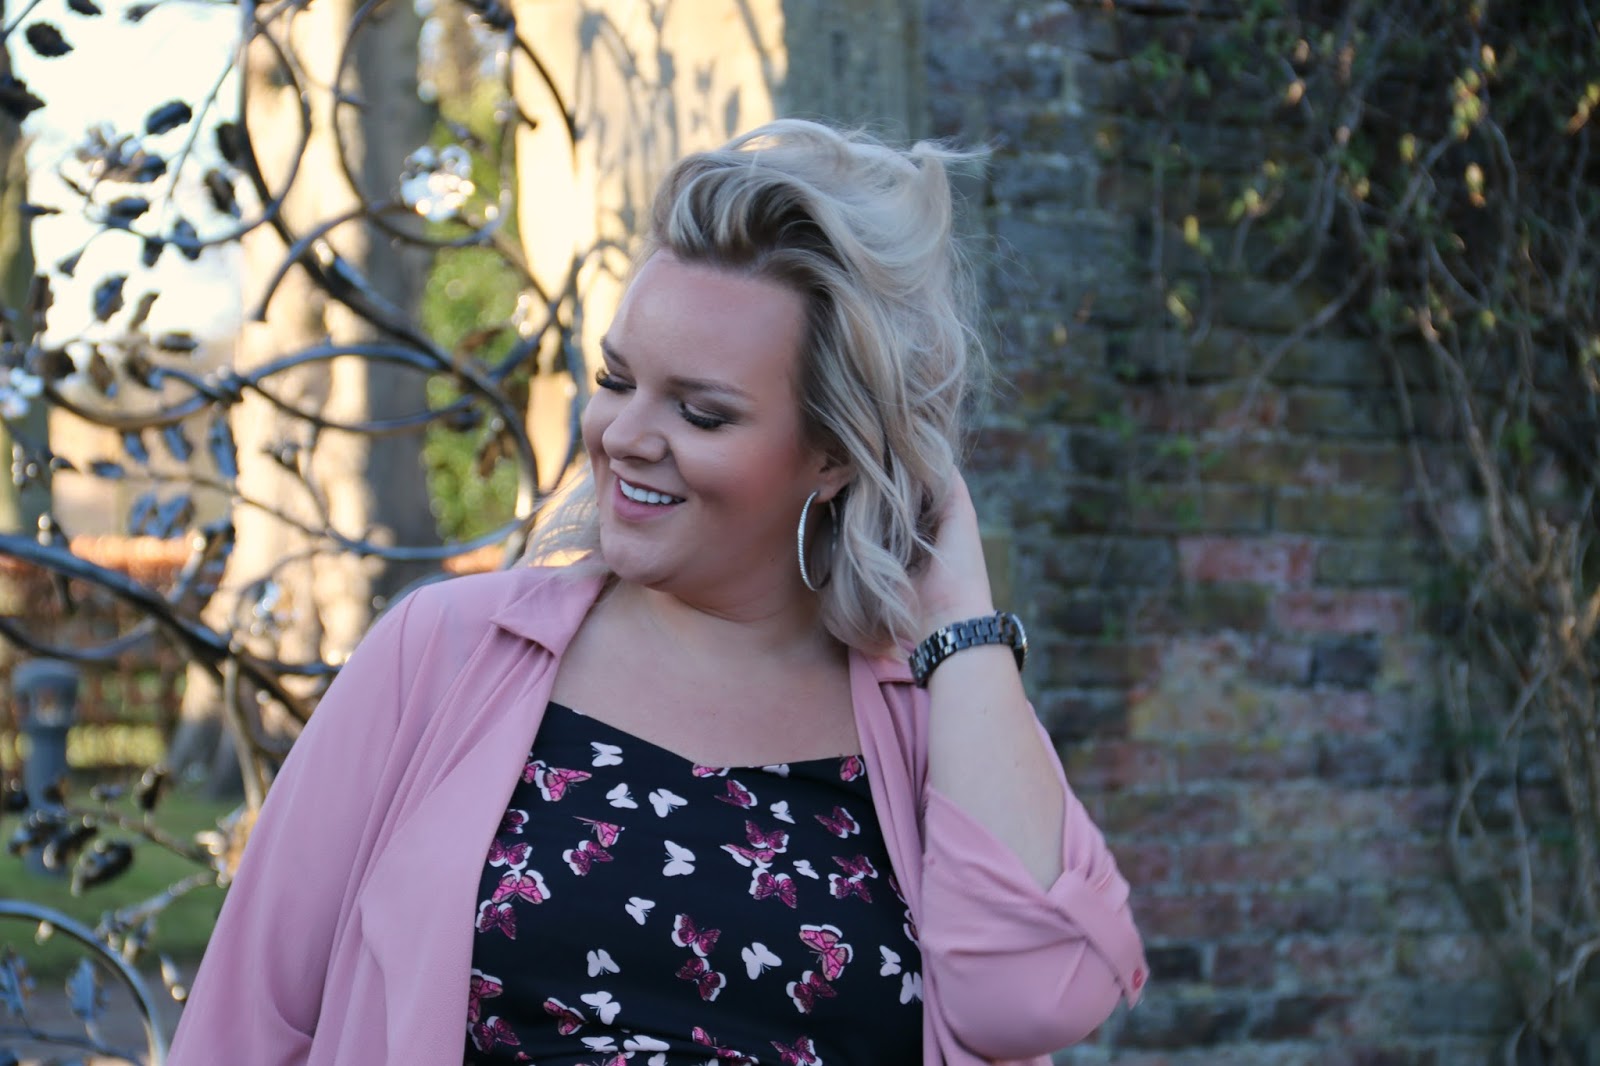 Goal setting and plus size spring fashion by whatlauraloves